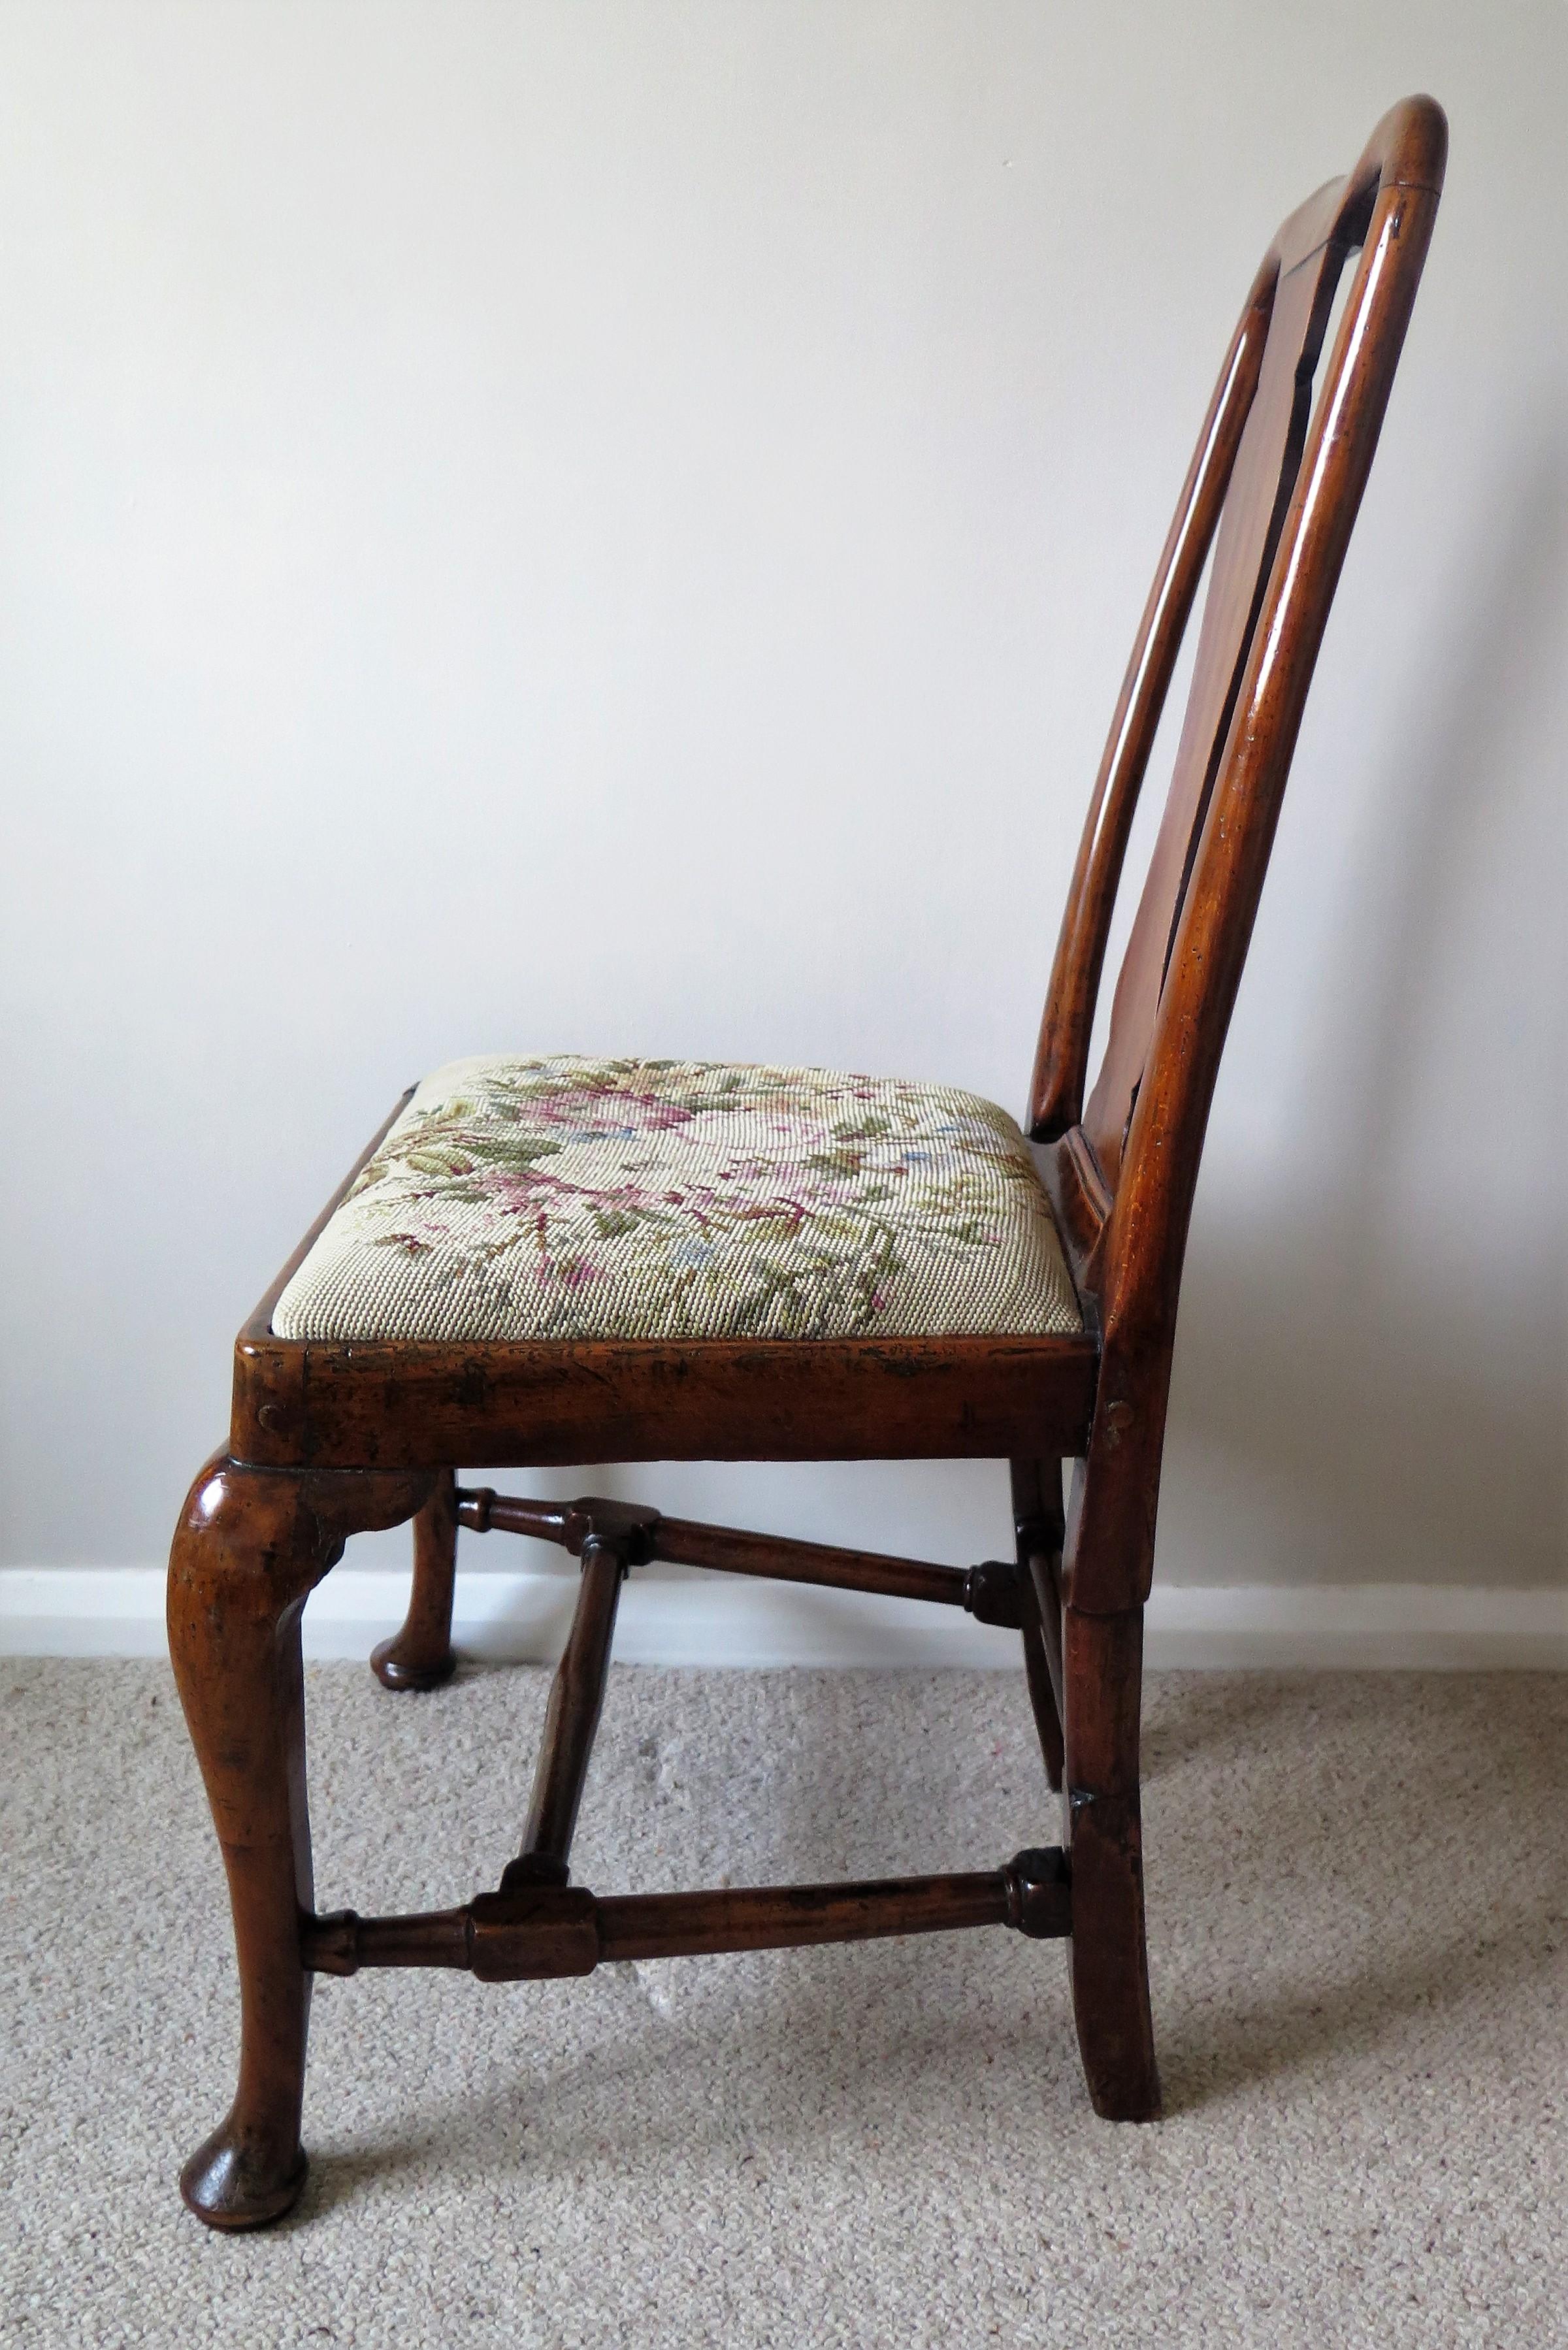 1700 antique chairs